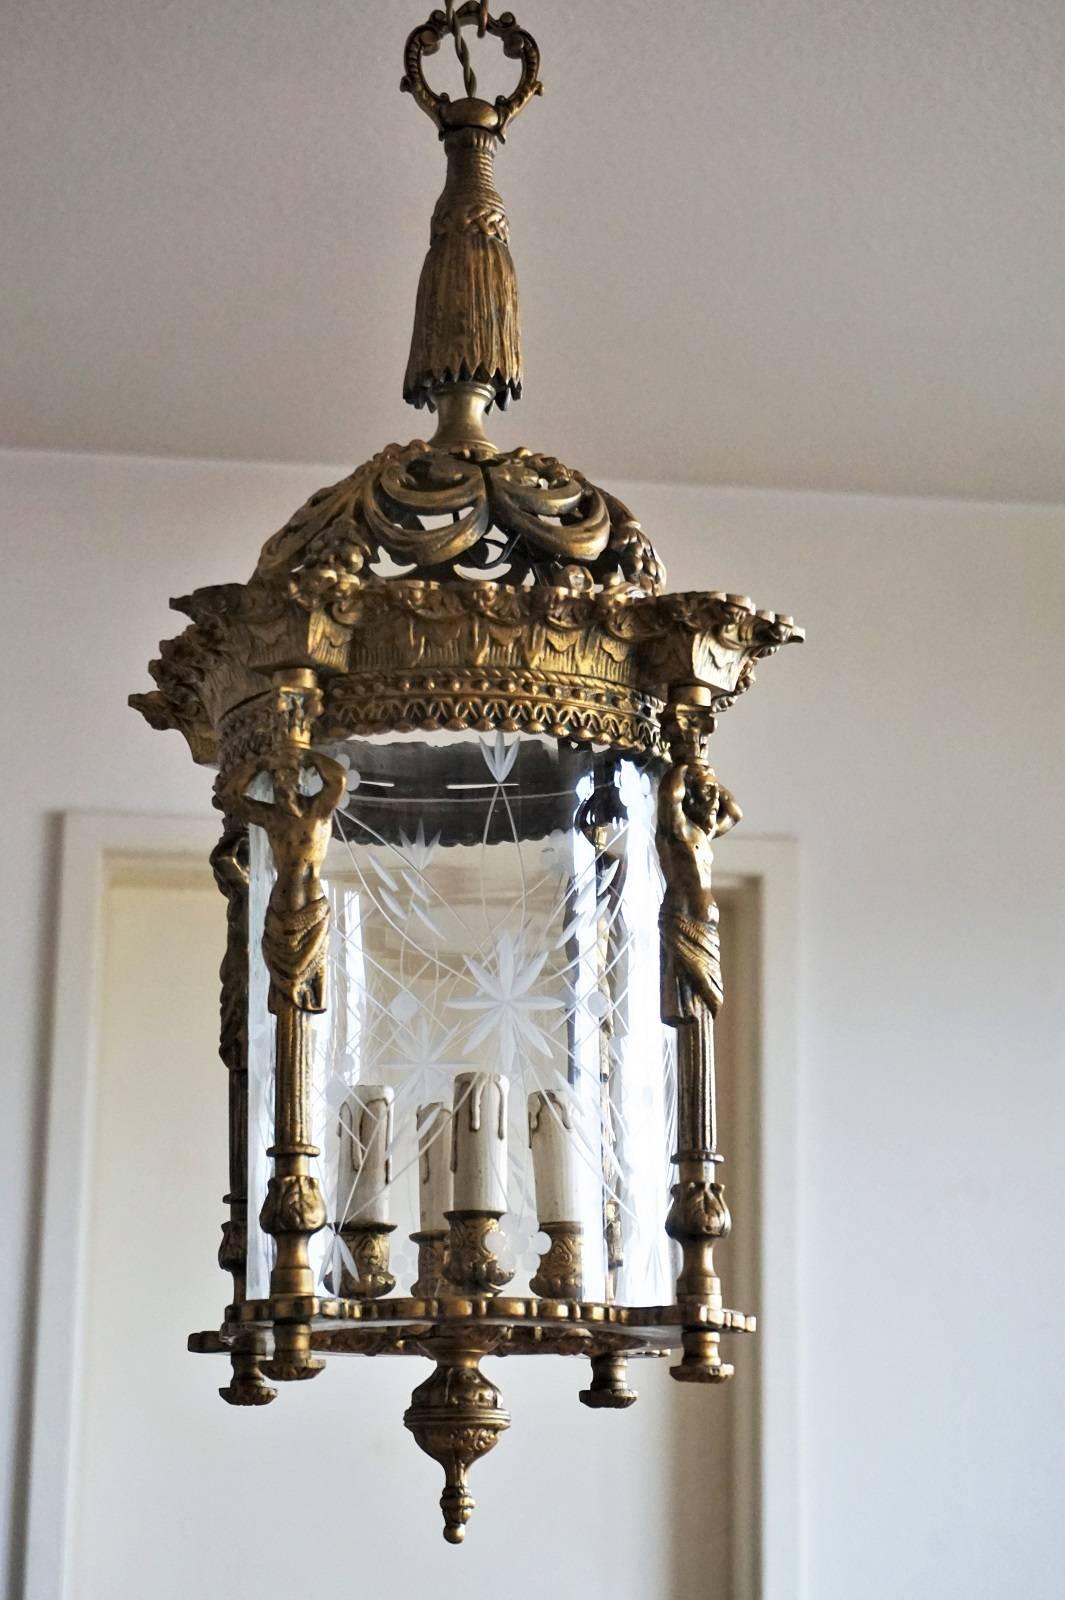 A large late 19th century Empire style four-light lantern of gilt solid bronze with cut-glass cylinder. Heavy bronze richly elaborate with four figurine columns, beautiful solid bronze chain and canopy.
The lantern is in very good condition with